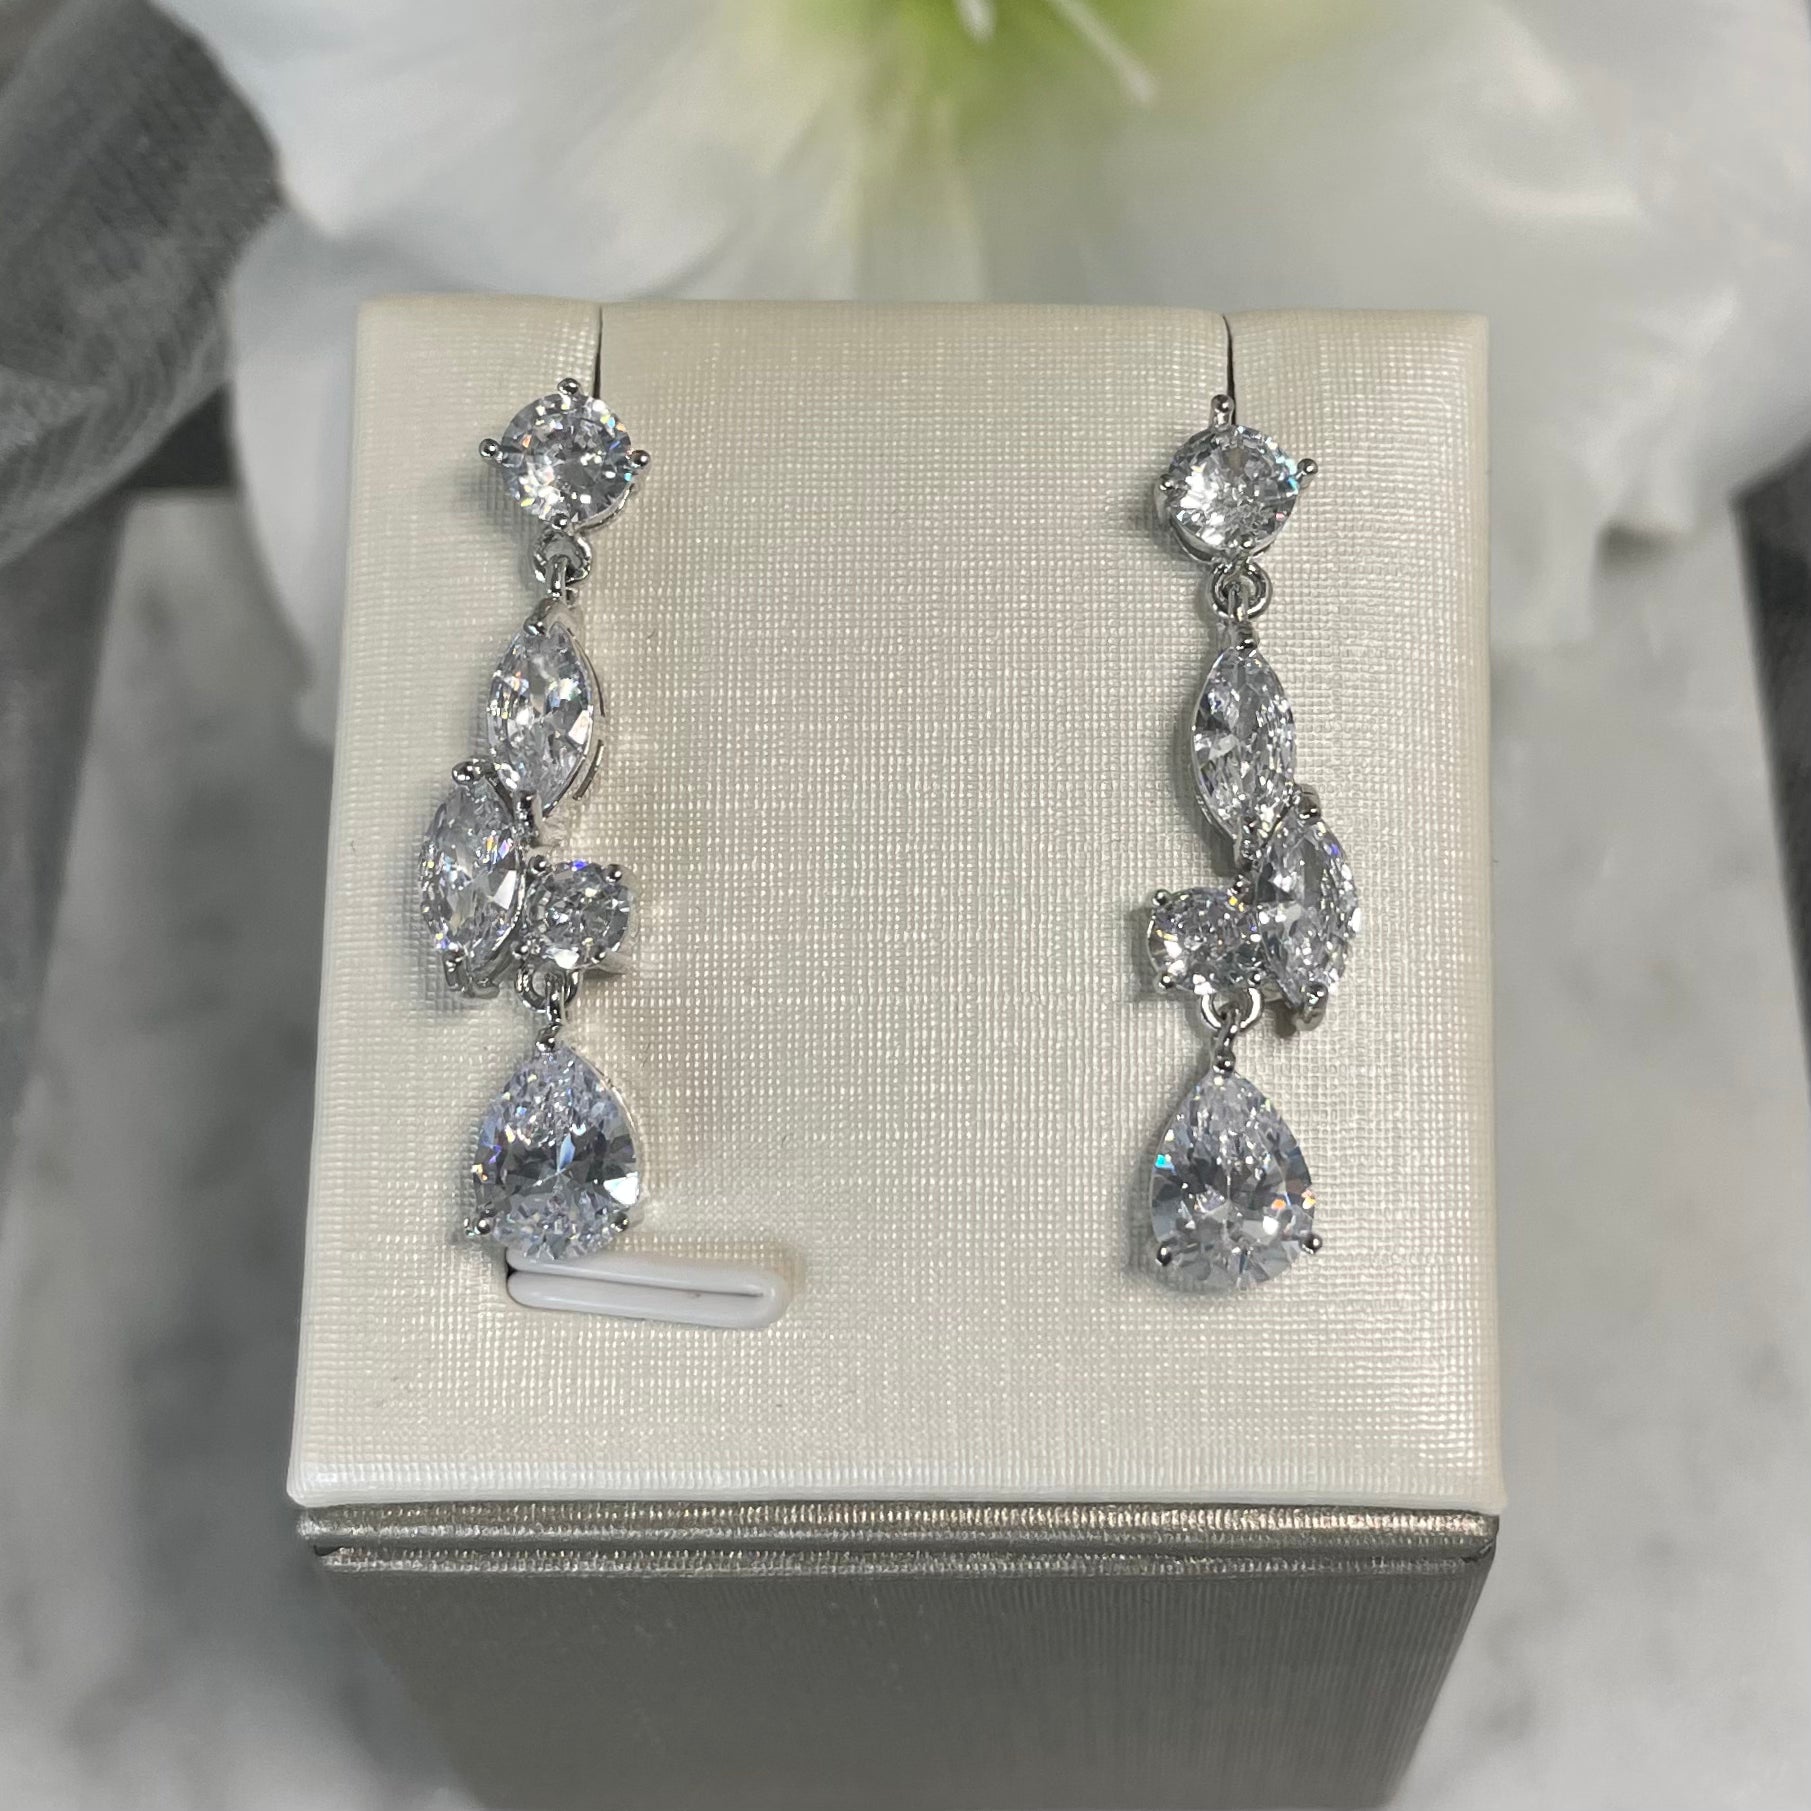 Julie cubic zirconia crystal wedding earrings featuring a sparkling round crystal, twin leaf-shaped designs, and a teardrop finish, perfect for adding sophistication to any outfit.